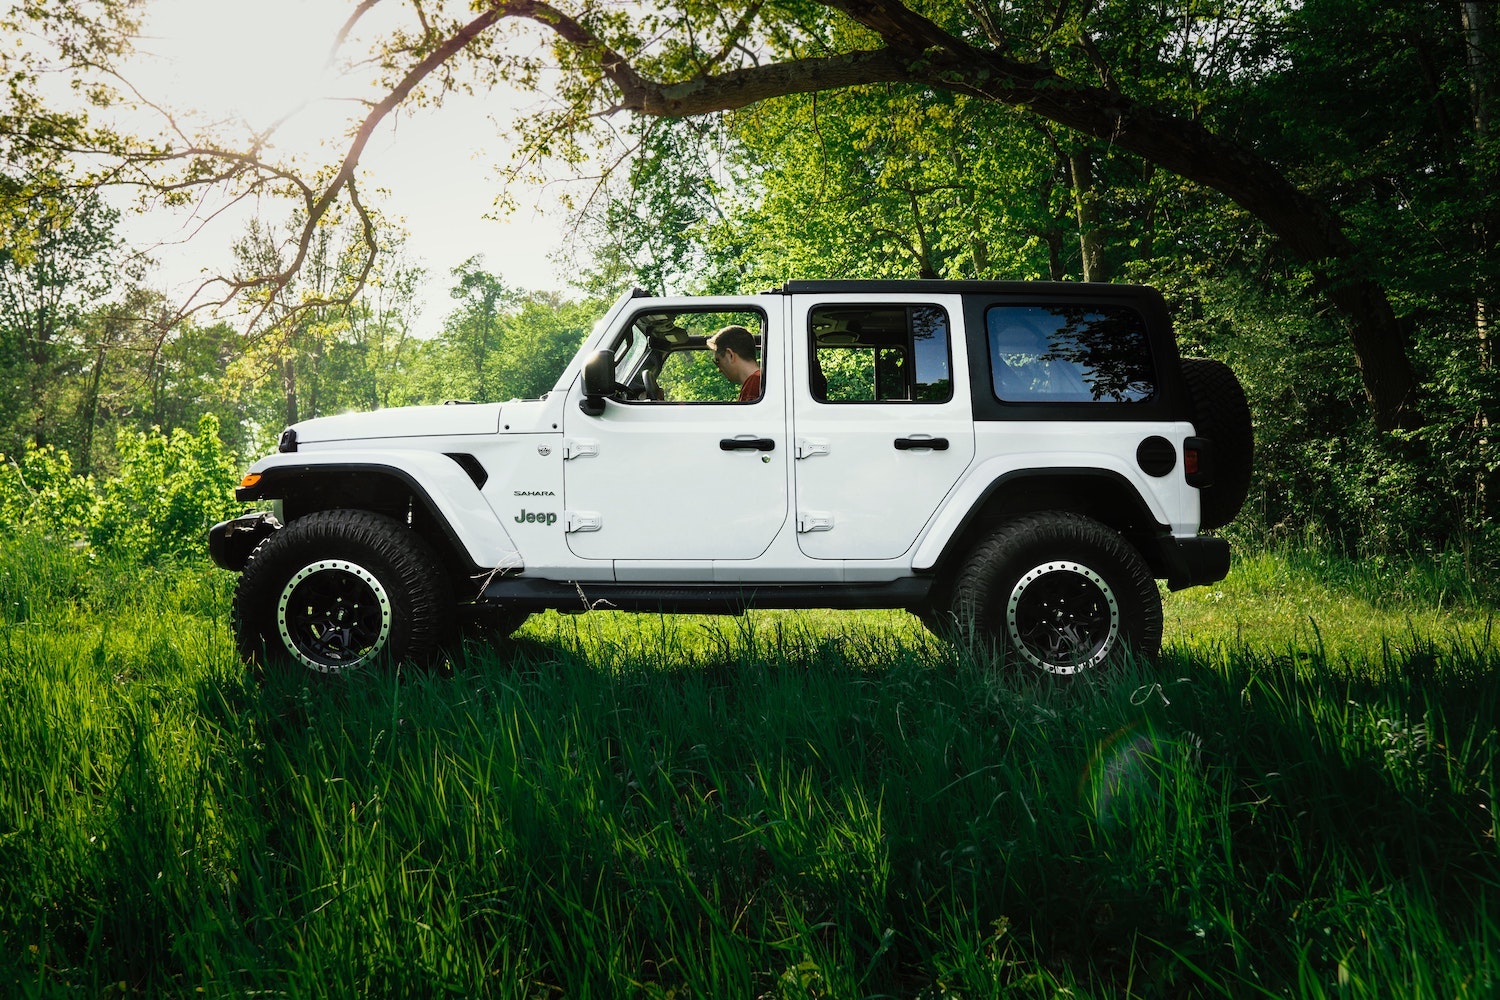 White four-door Jeep Wrangler Unlimited parked under a tree.